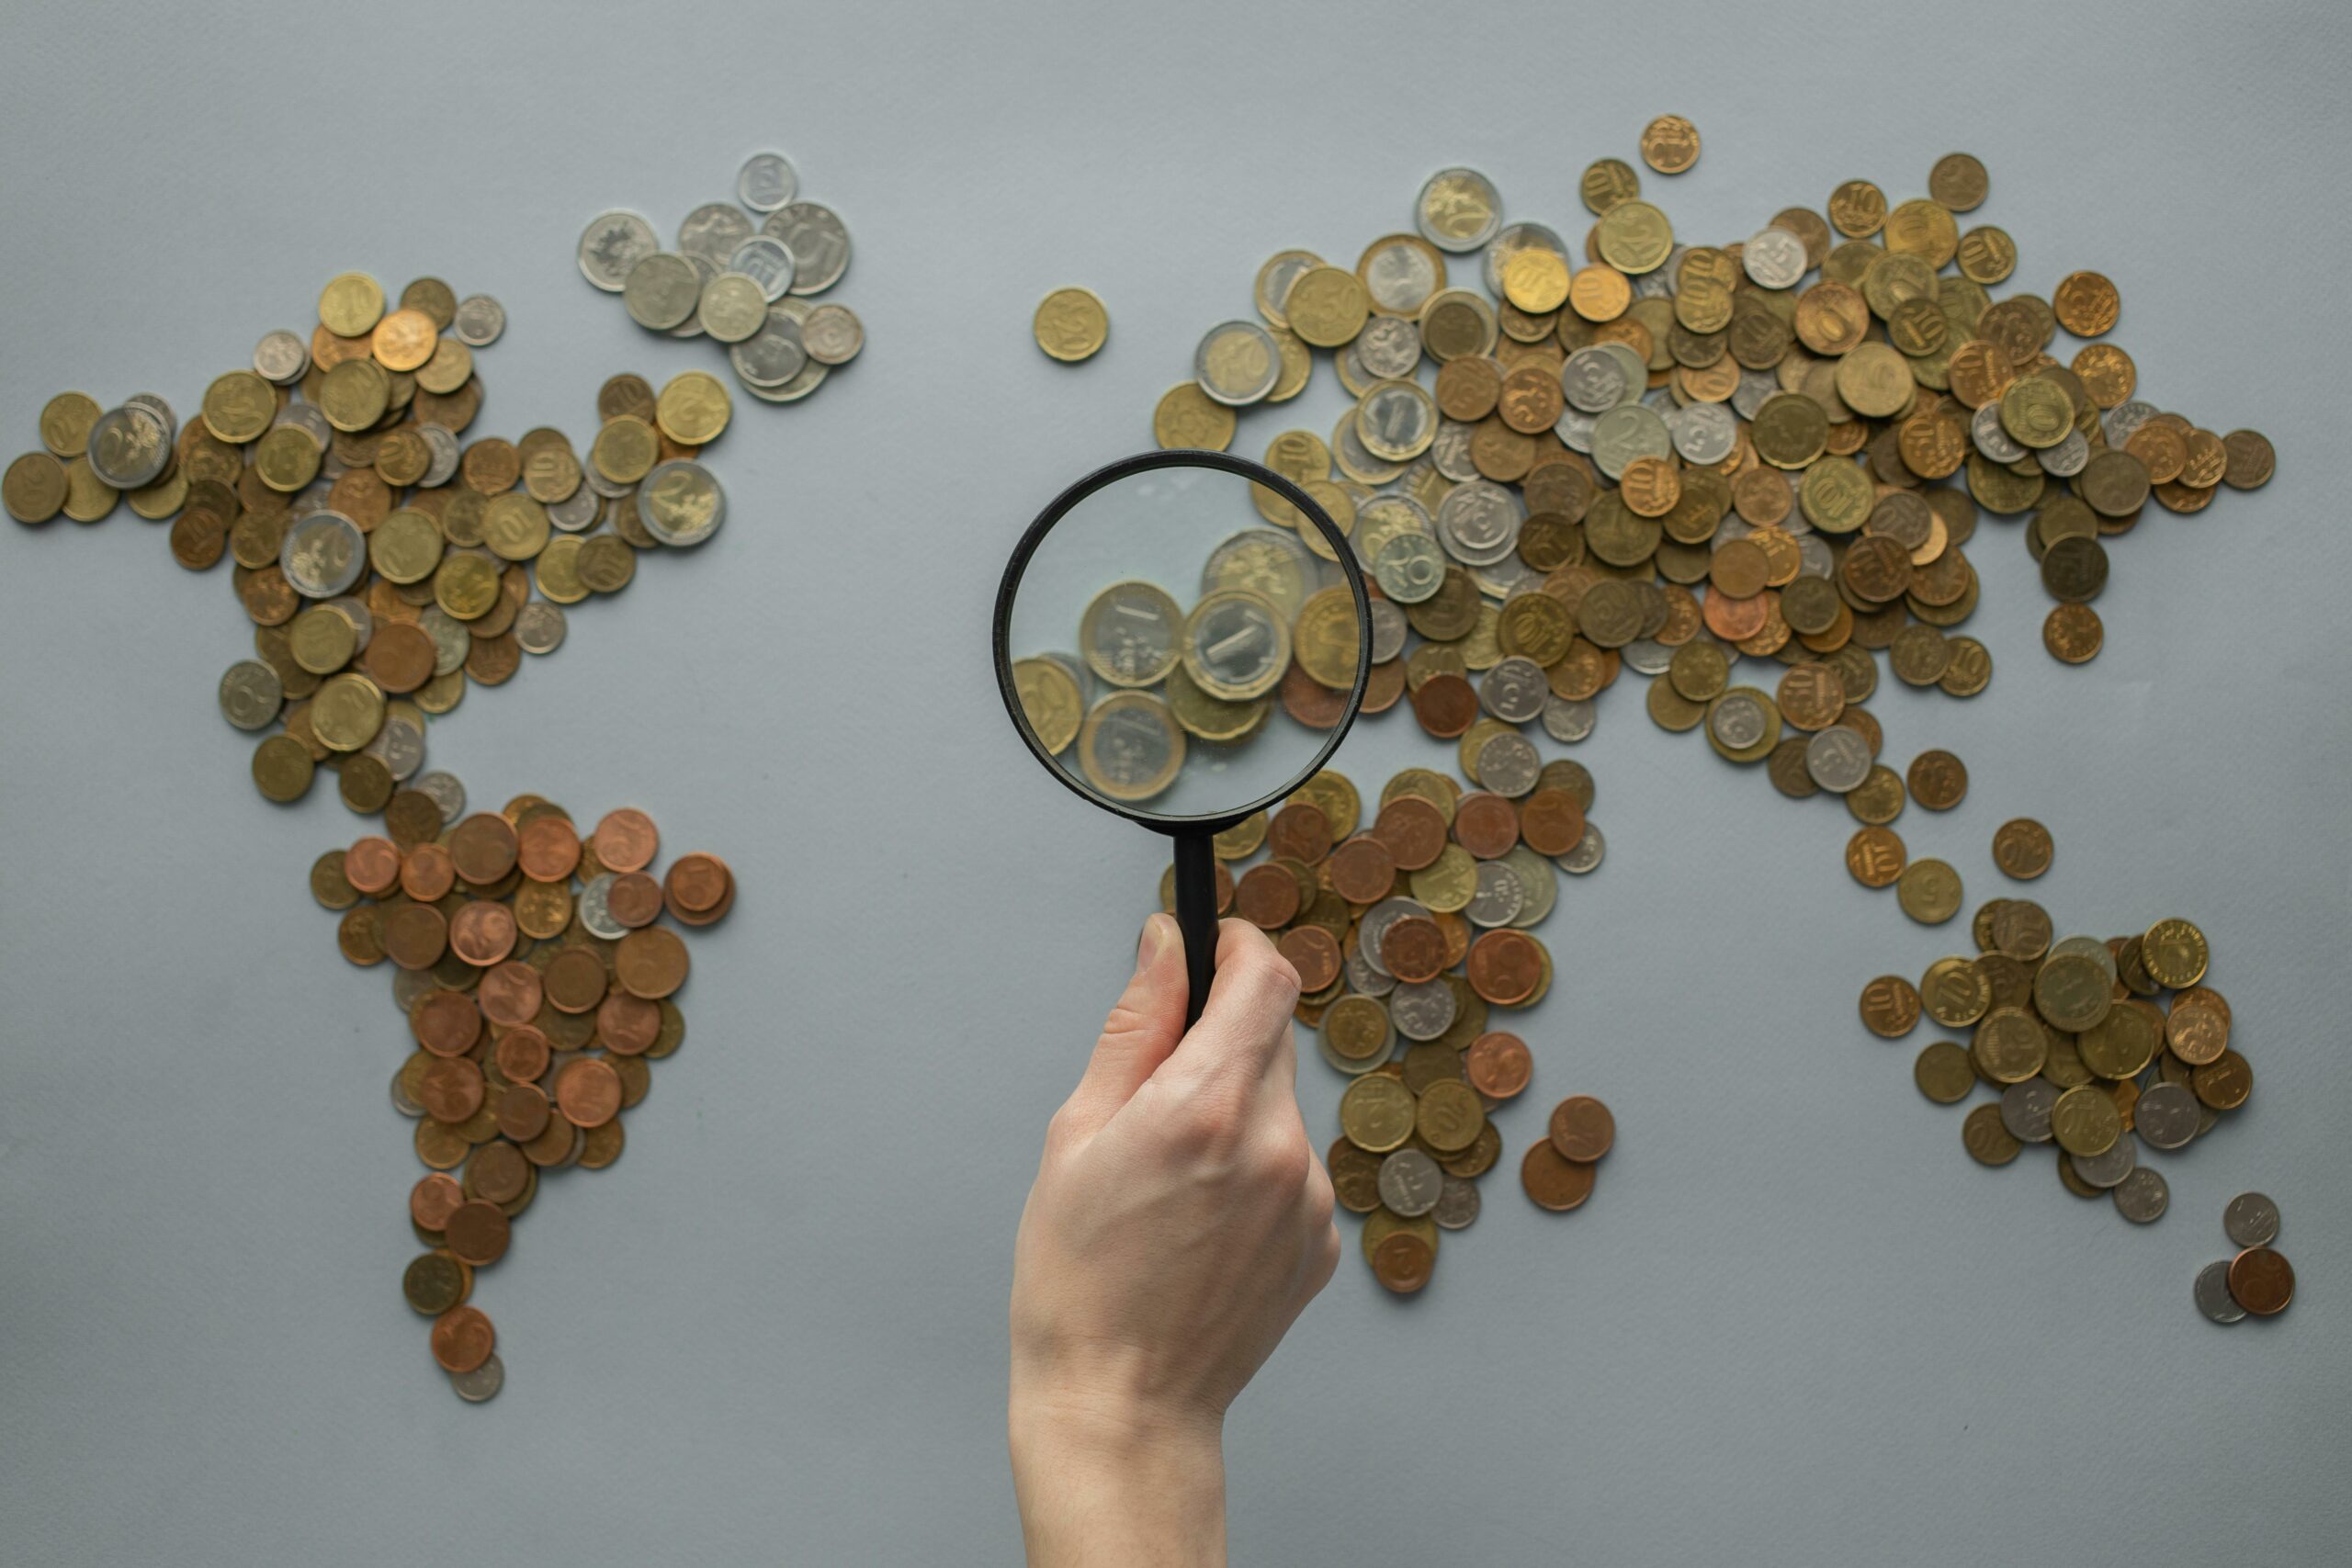 COINS LAID OUT IN SHAPE ON WORLD MAP, PERSON HOLDING MANGIFYING GLASS